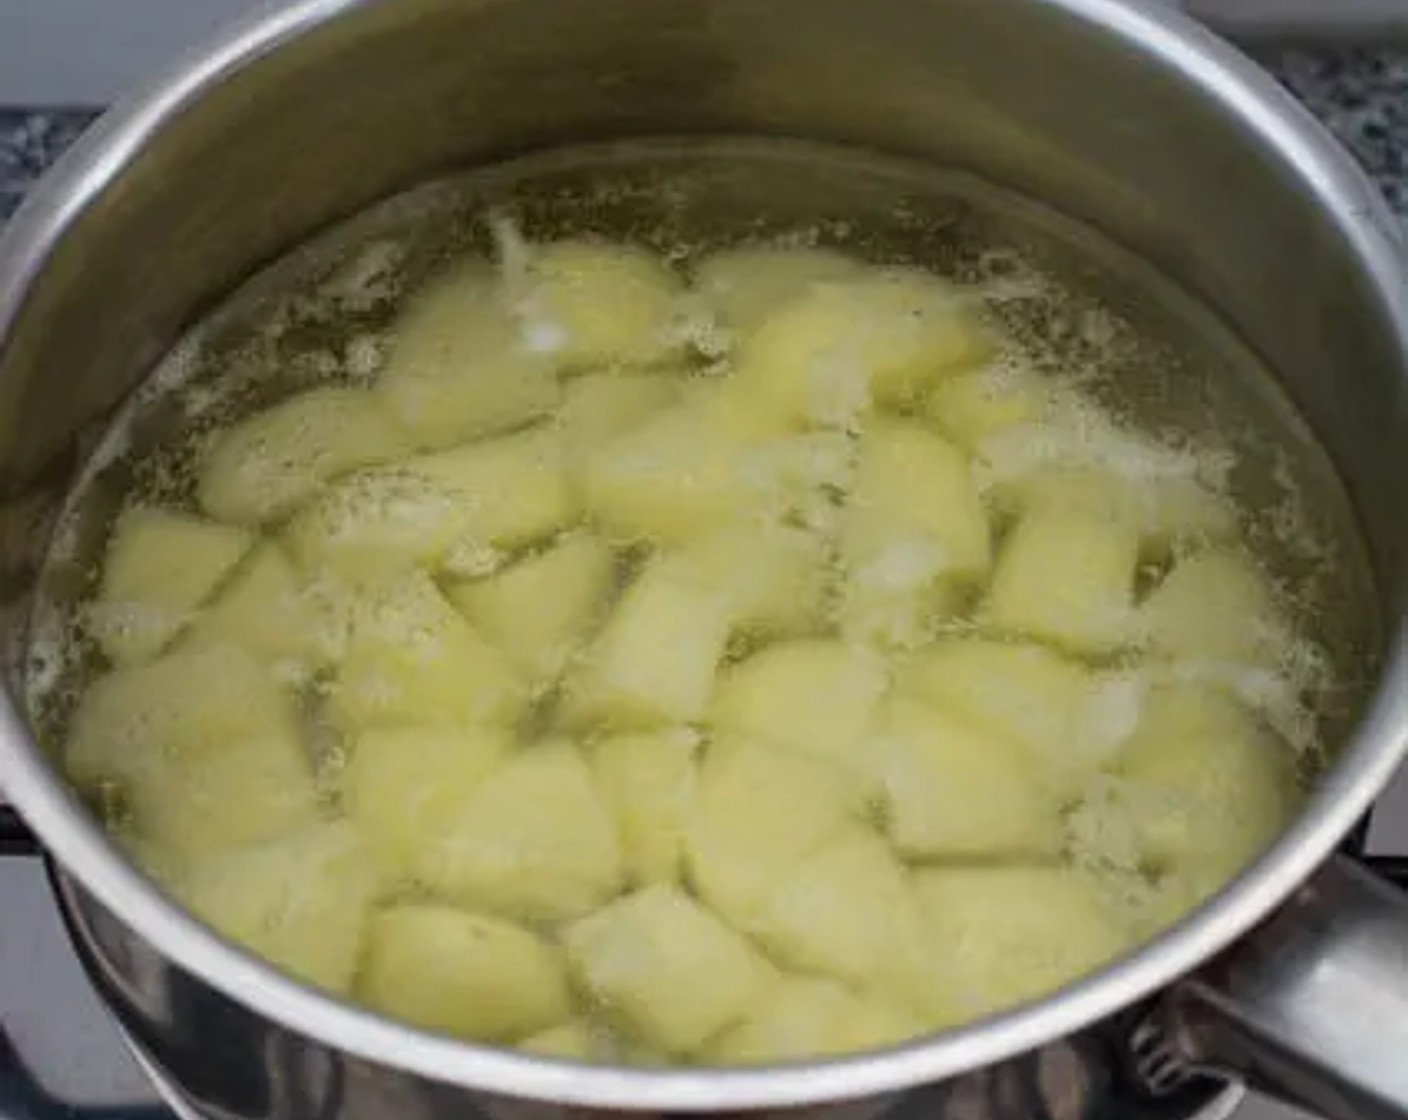 step 2 Place the potatoes in a small saucepan and fill the saucepan with just enough water to cover the potatoes. Bring the water to a boil and allow the potatoes to boil for 5 minutes. Drain the water and set the potatoes aside.